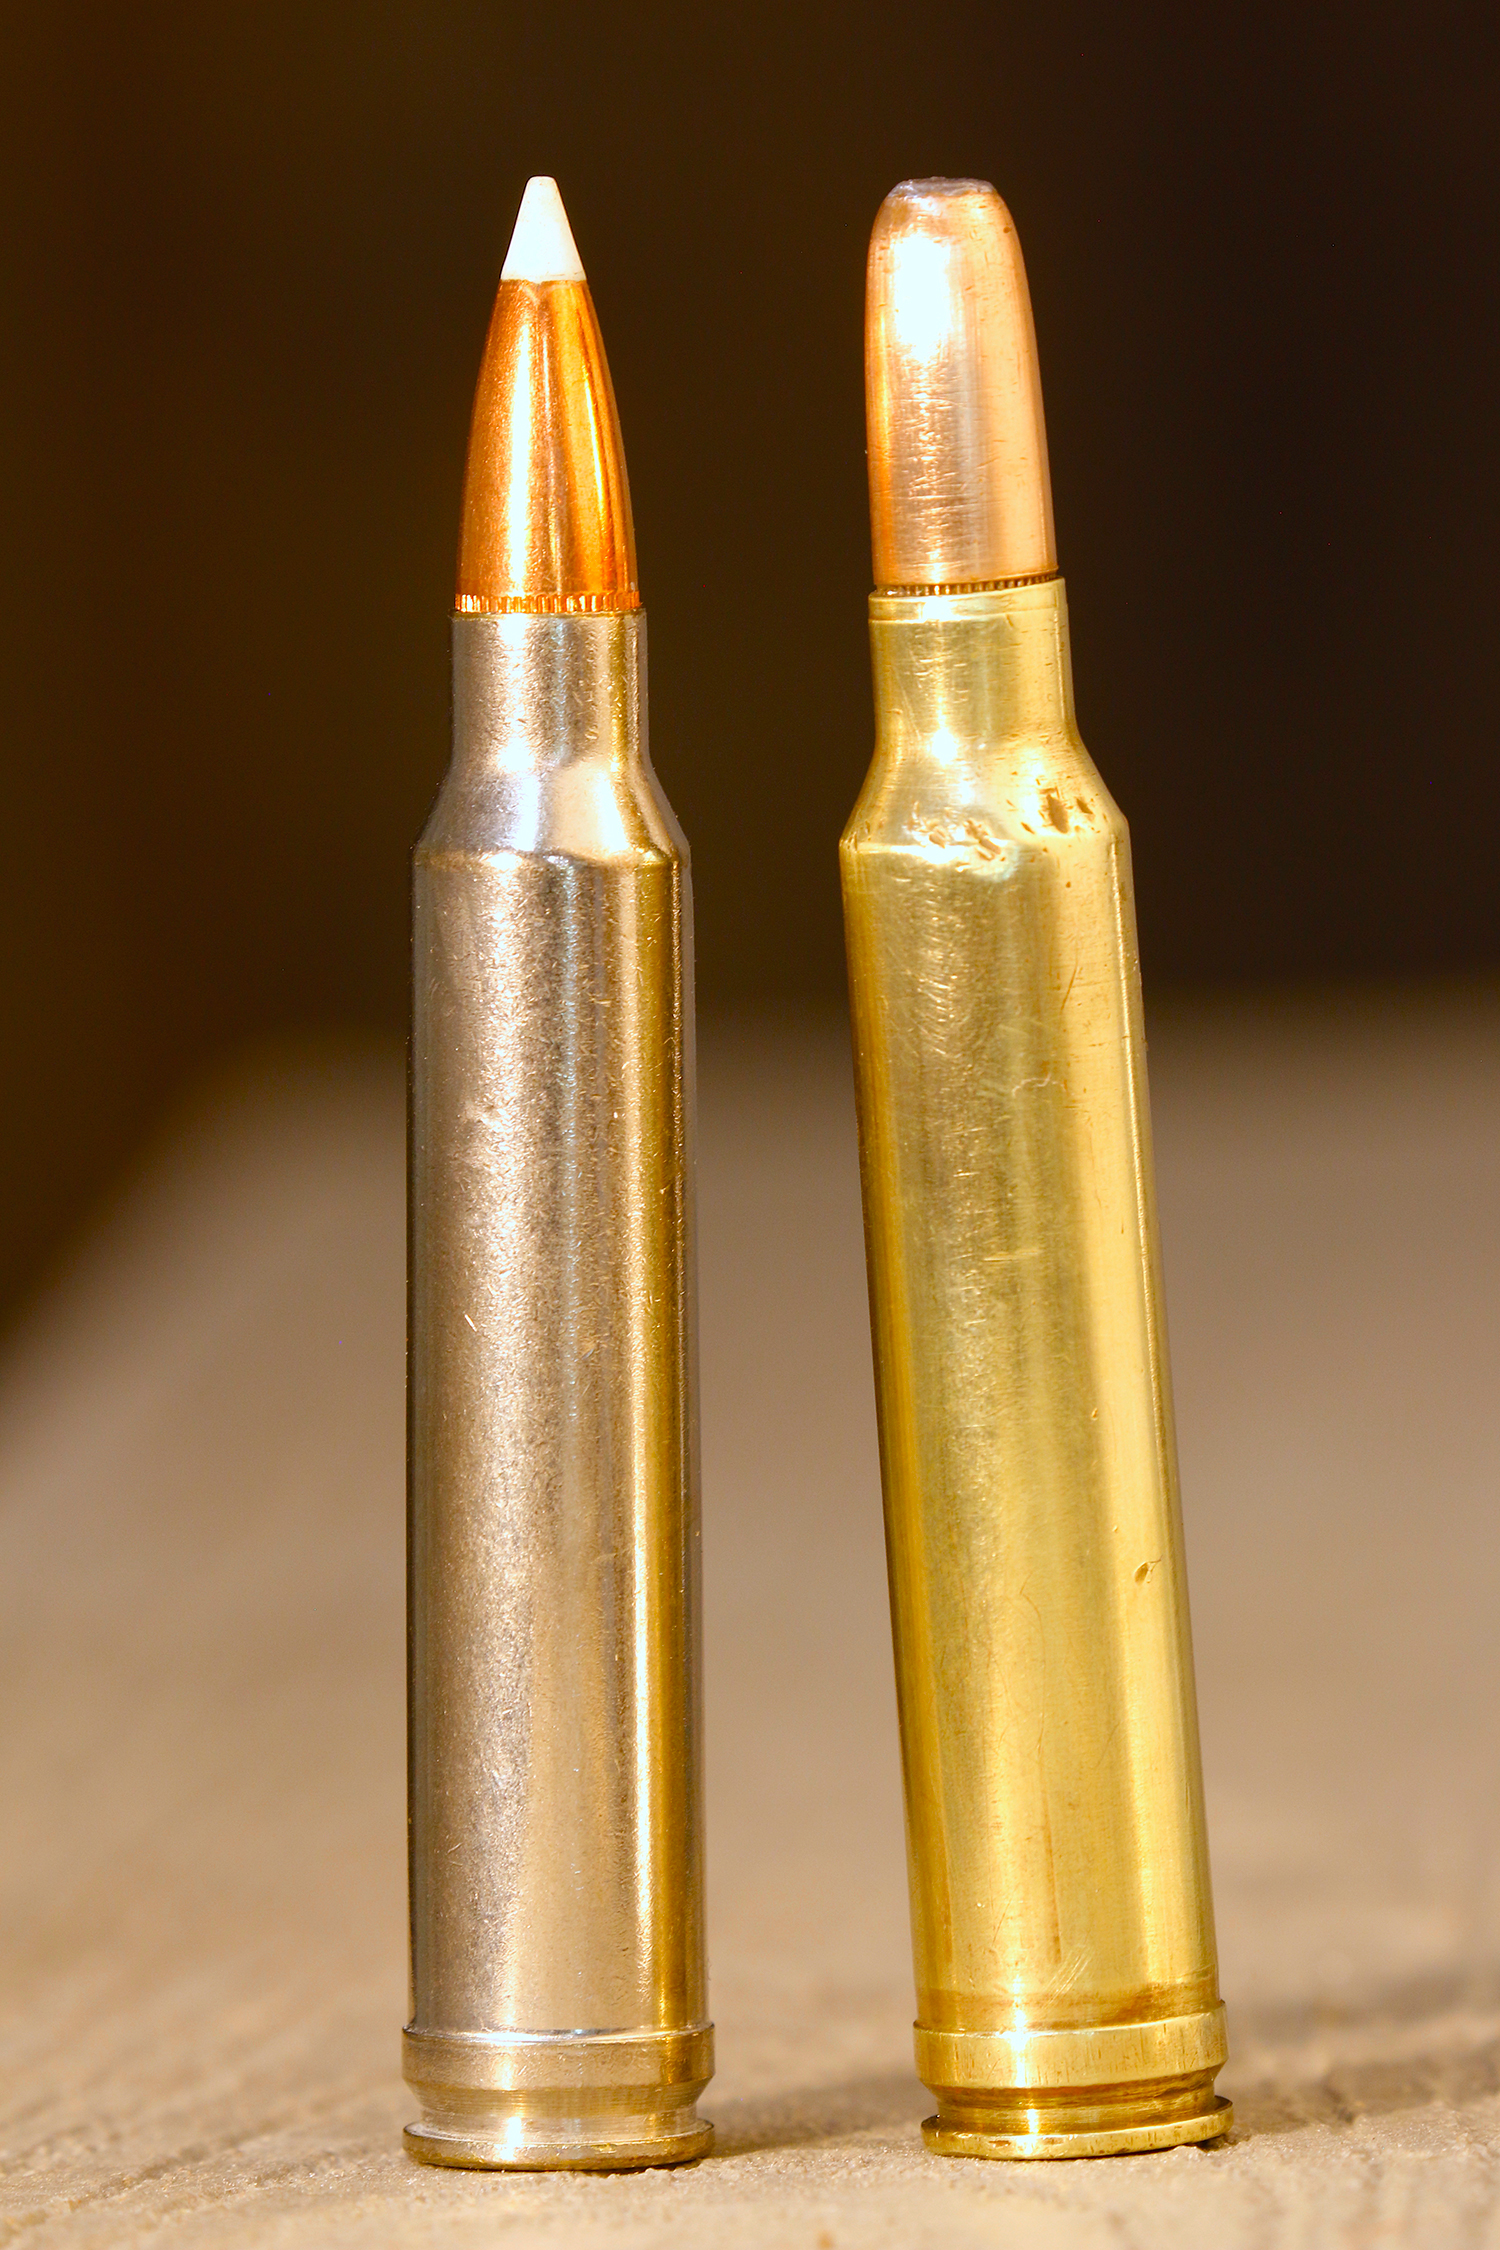 A .300 Win Mag bullet with Nosler Accubond and a Round Nose bullet.